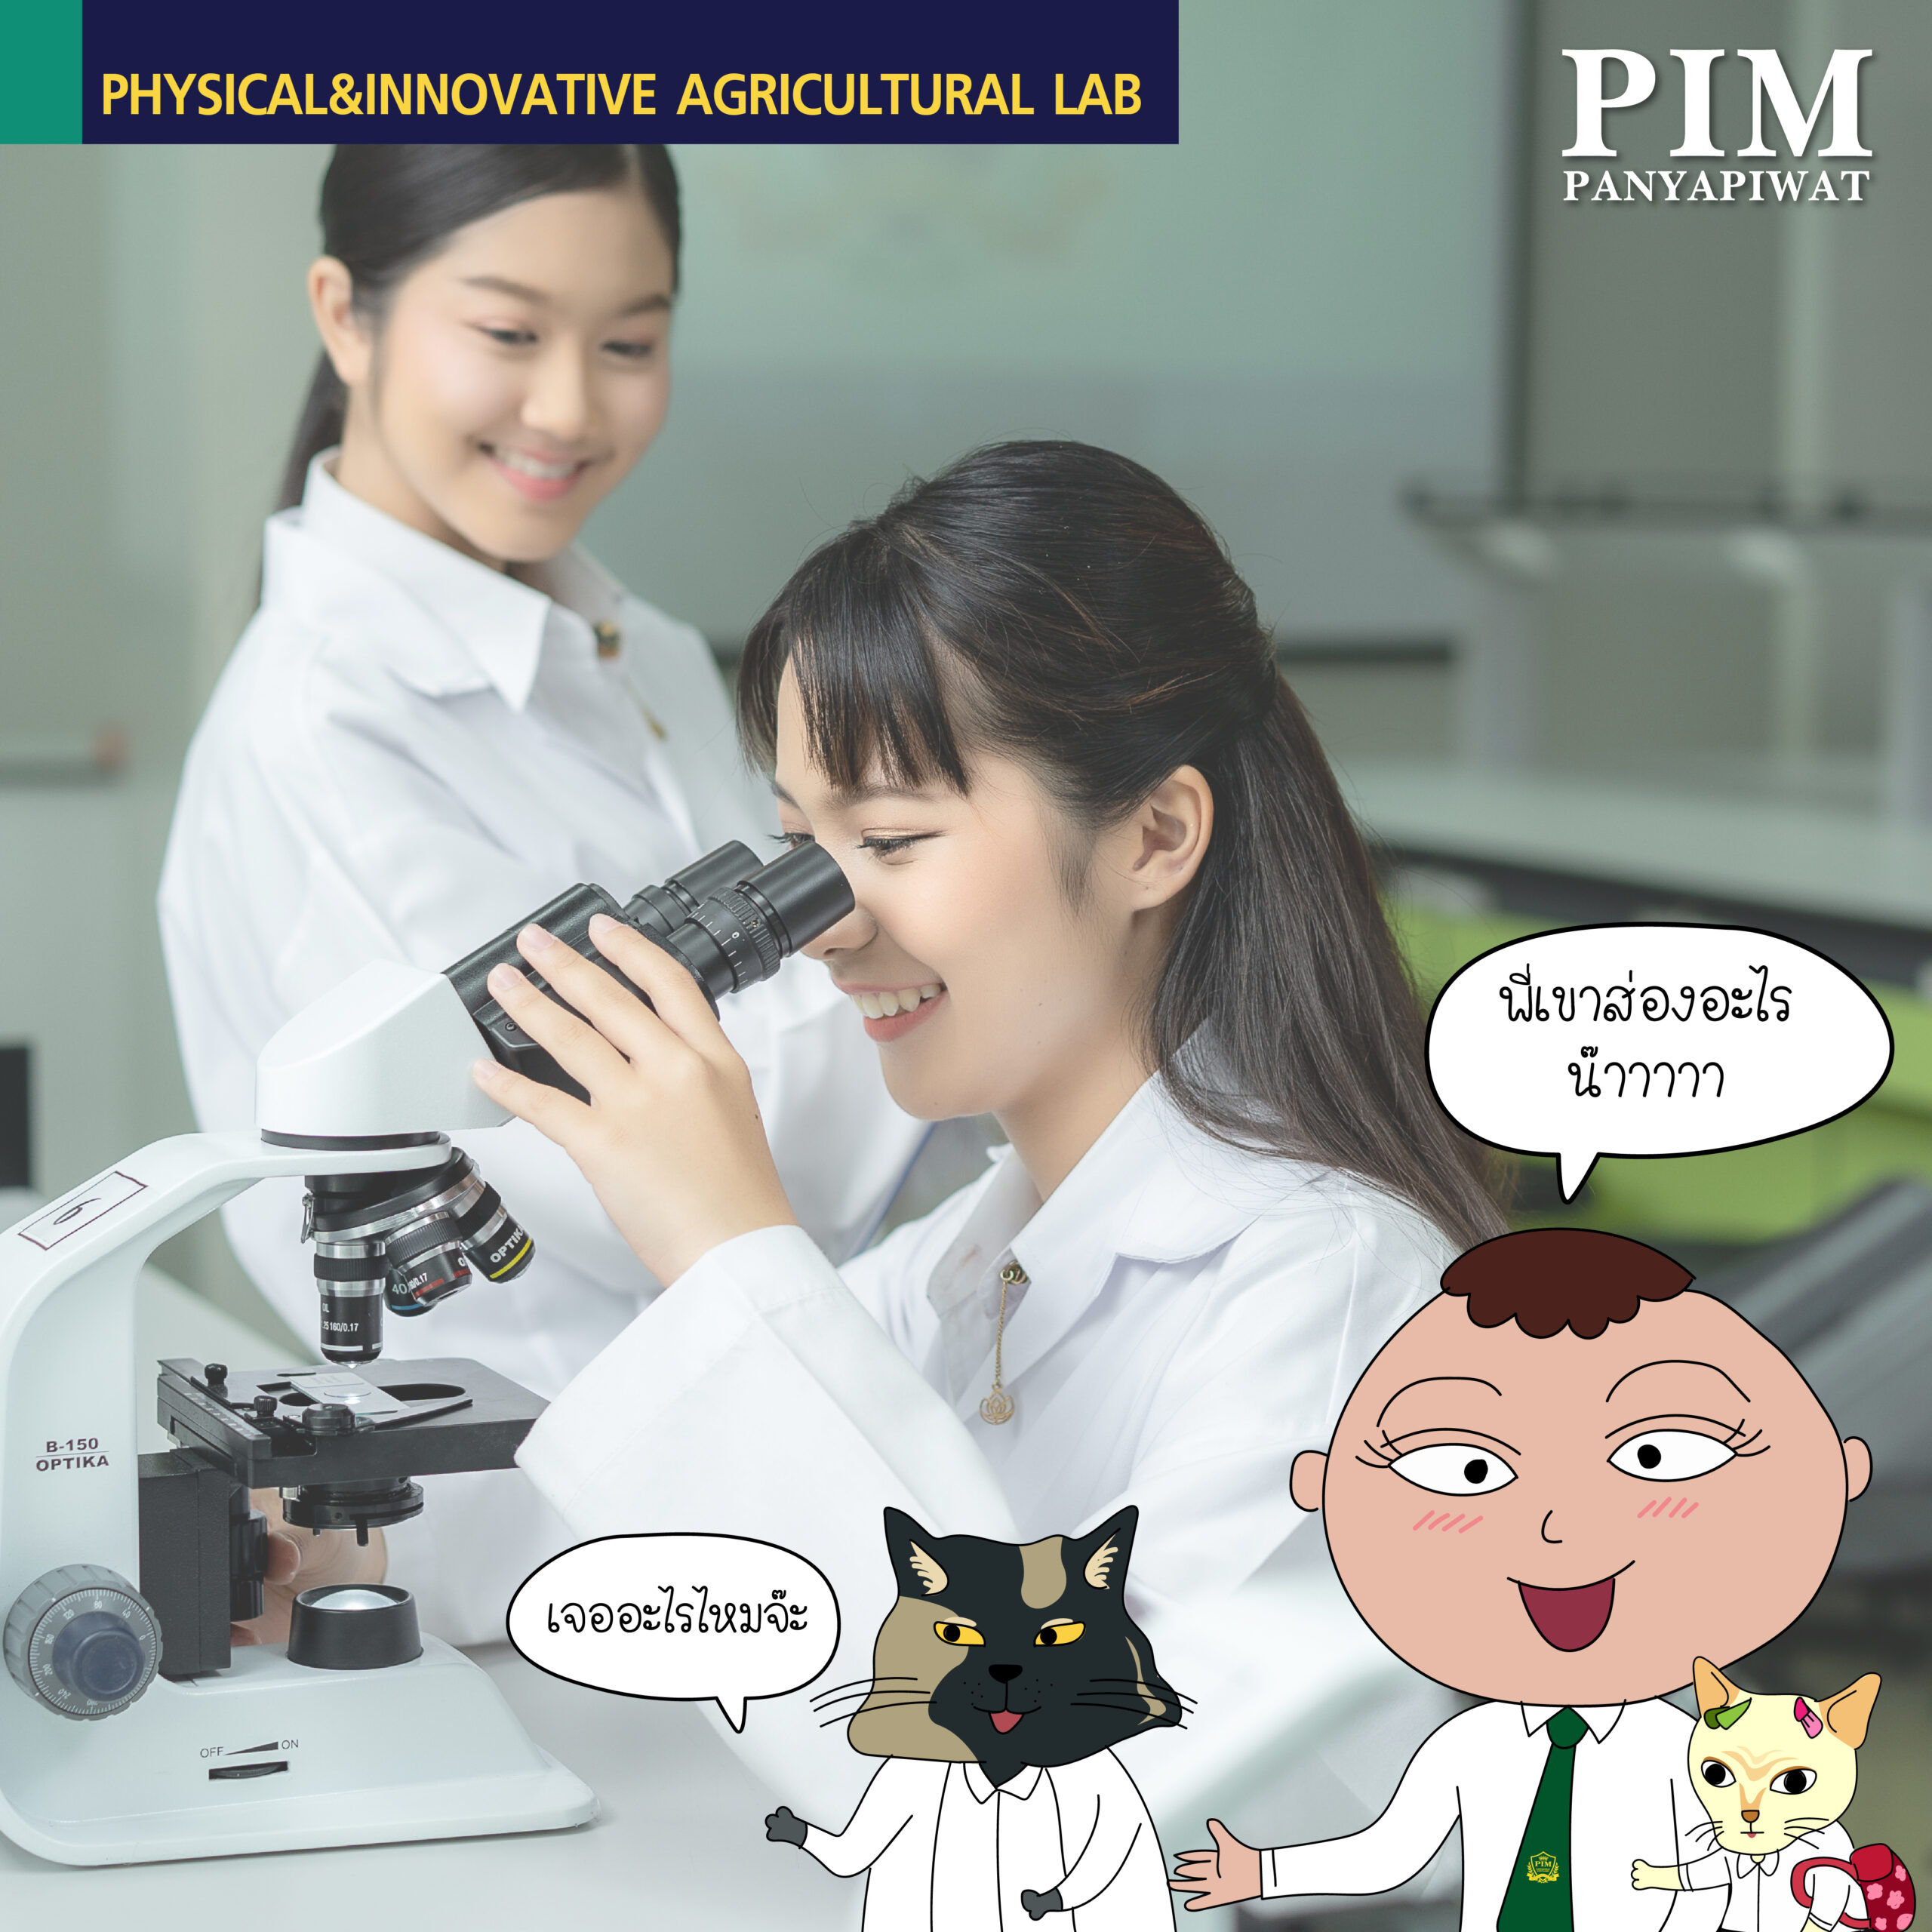 PHYSICAL&INNOVATIVE AGRICULTURAL LAB